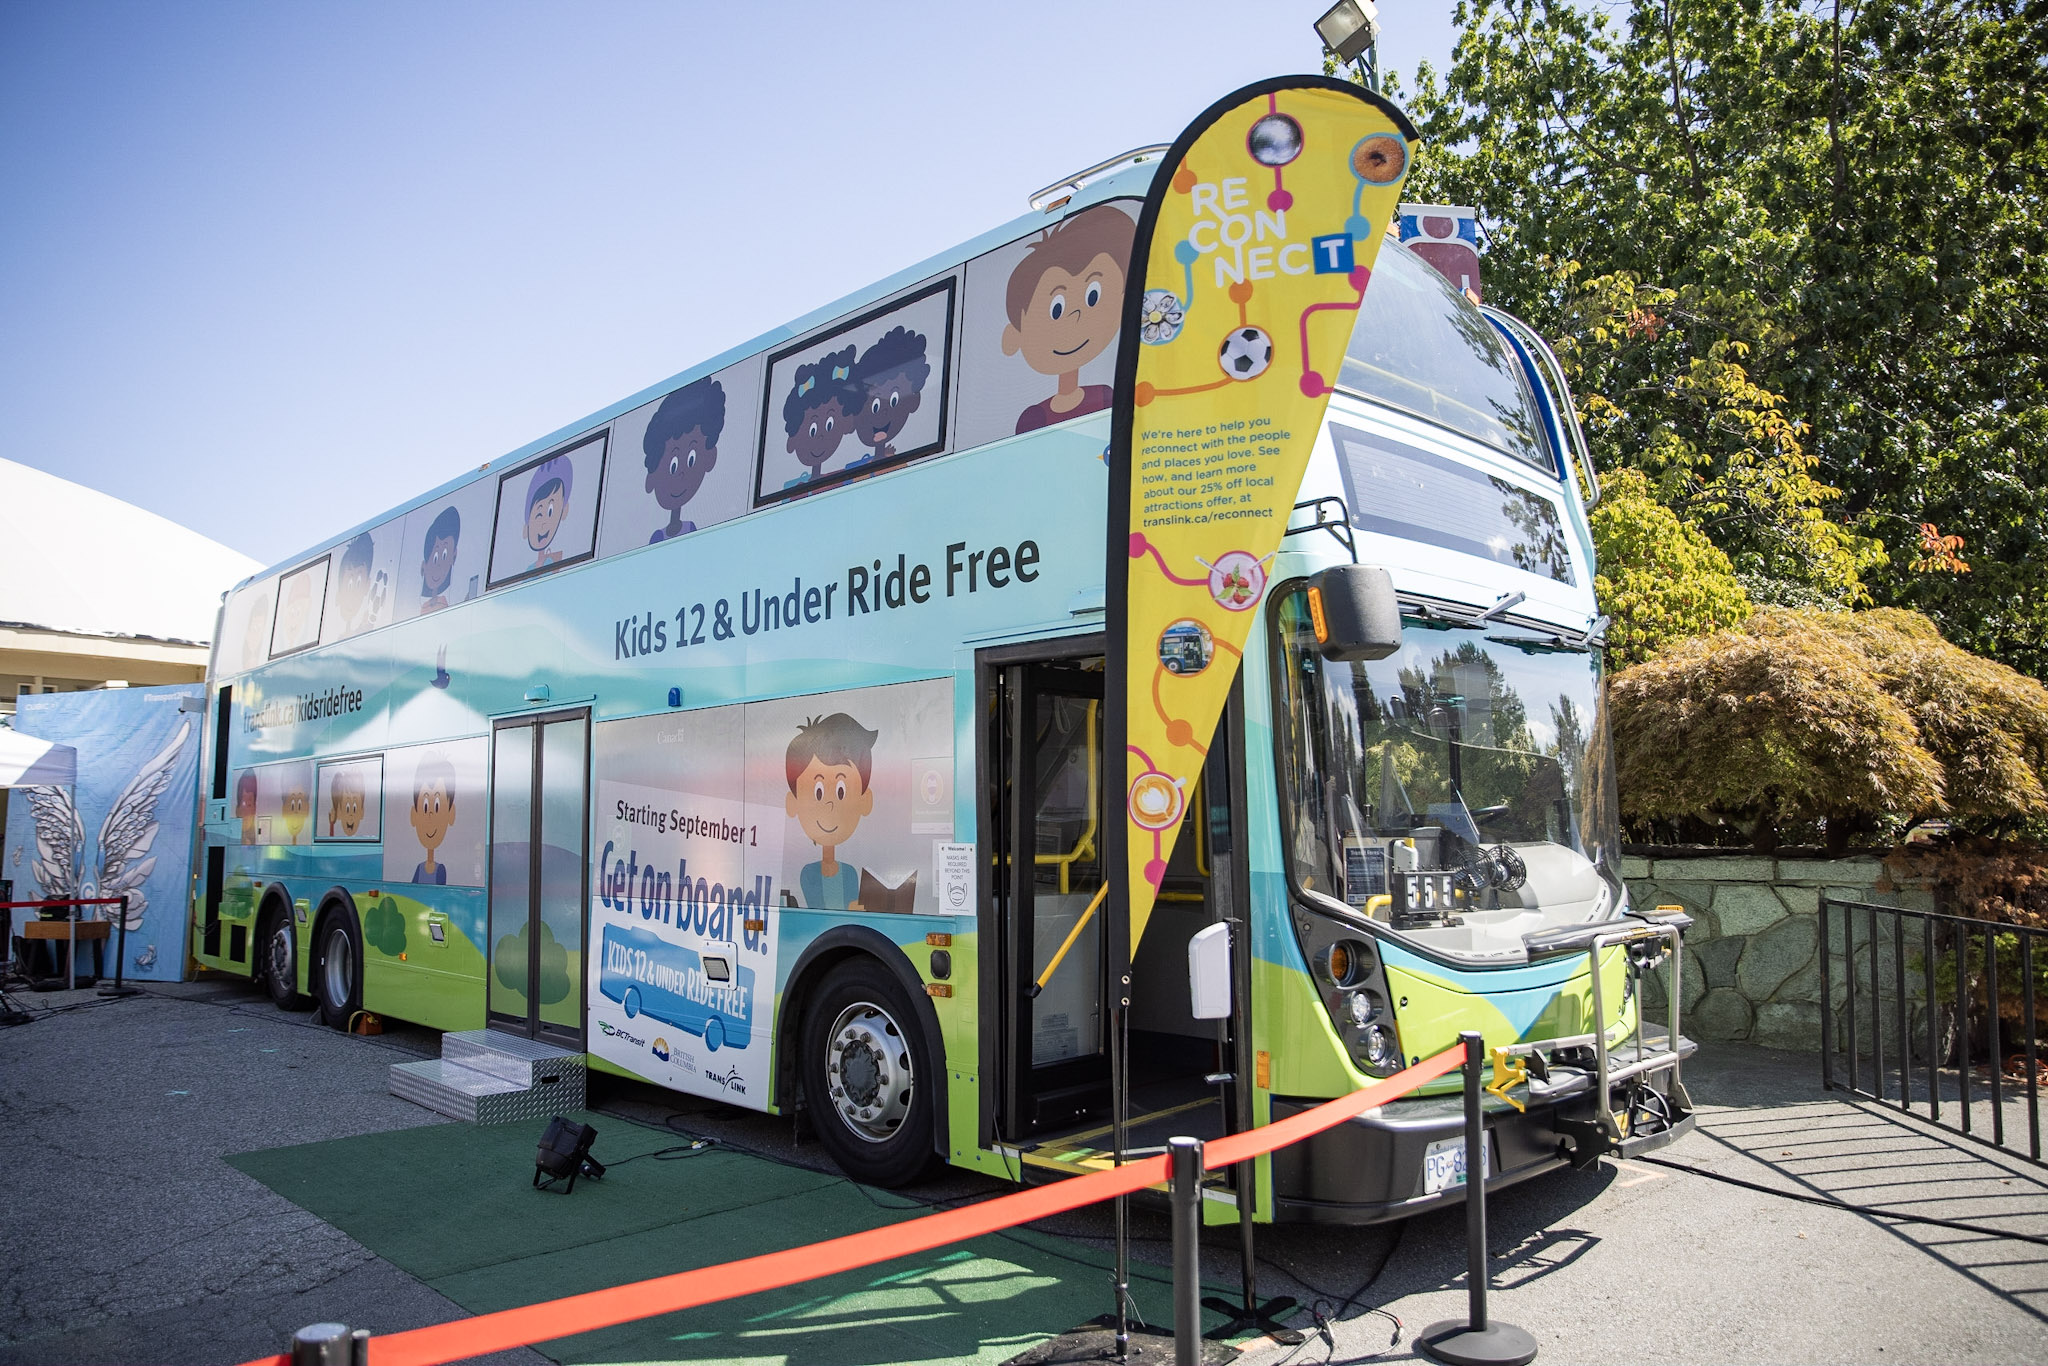 A double decker bus is seen wrapped in a campaign ad for Free Transit for children 12 and under